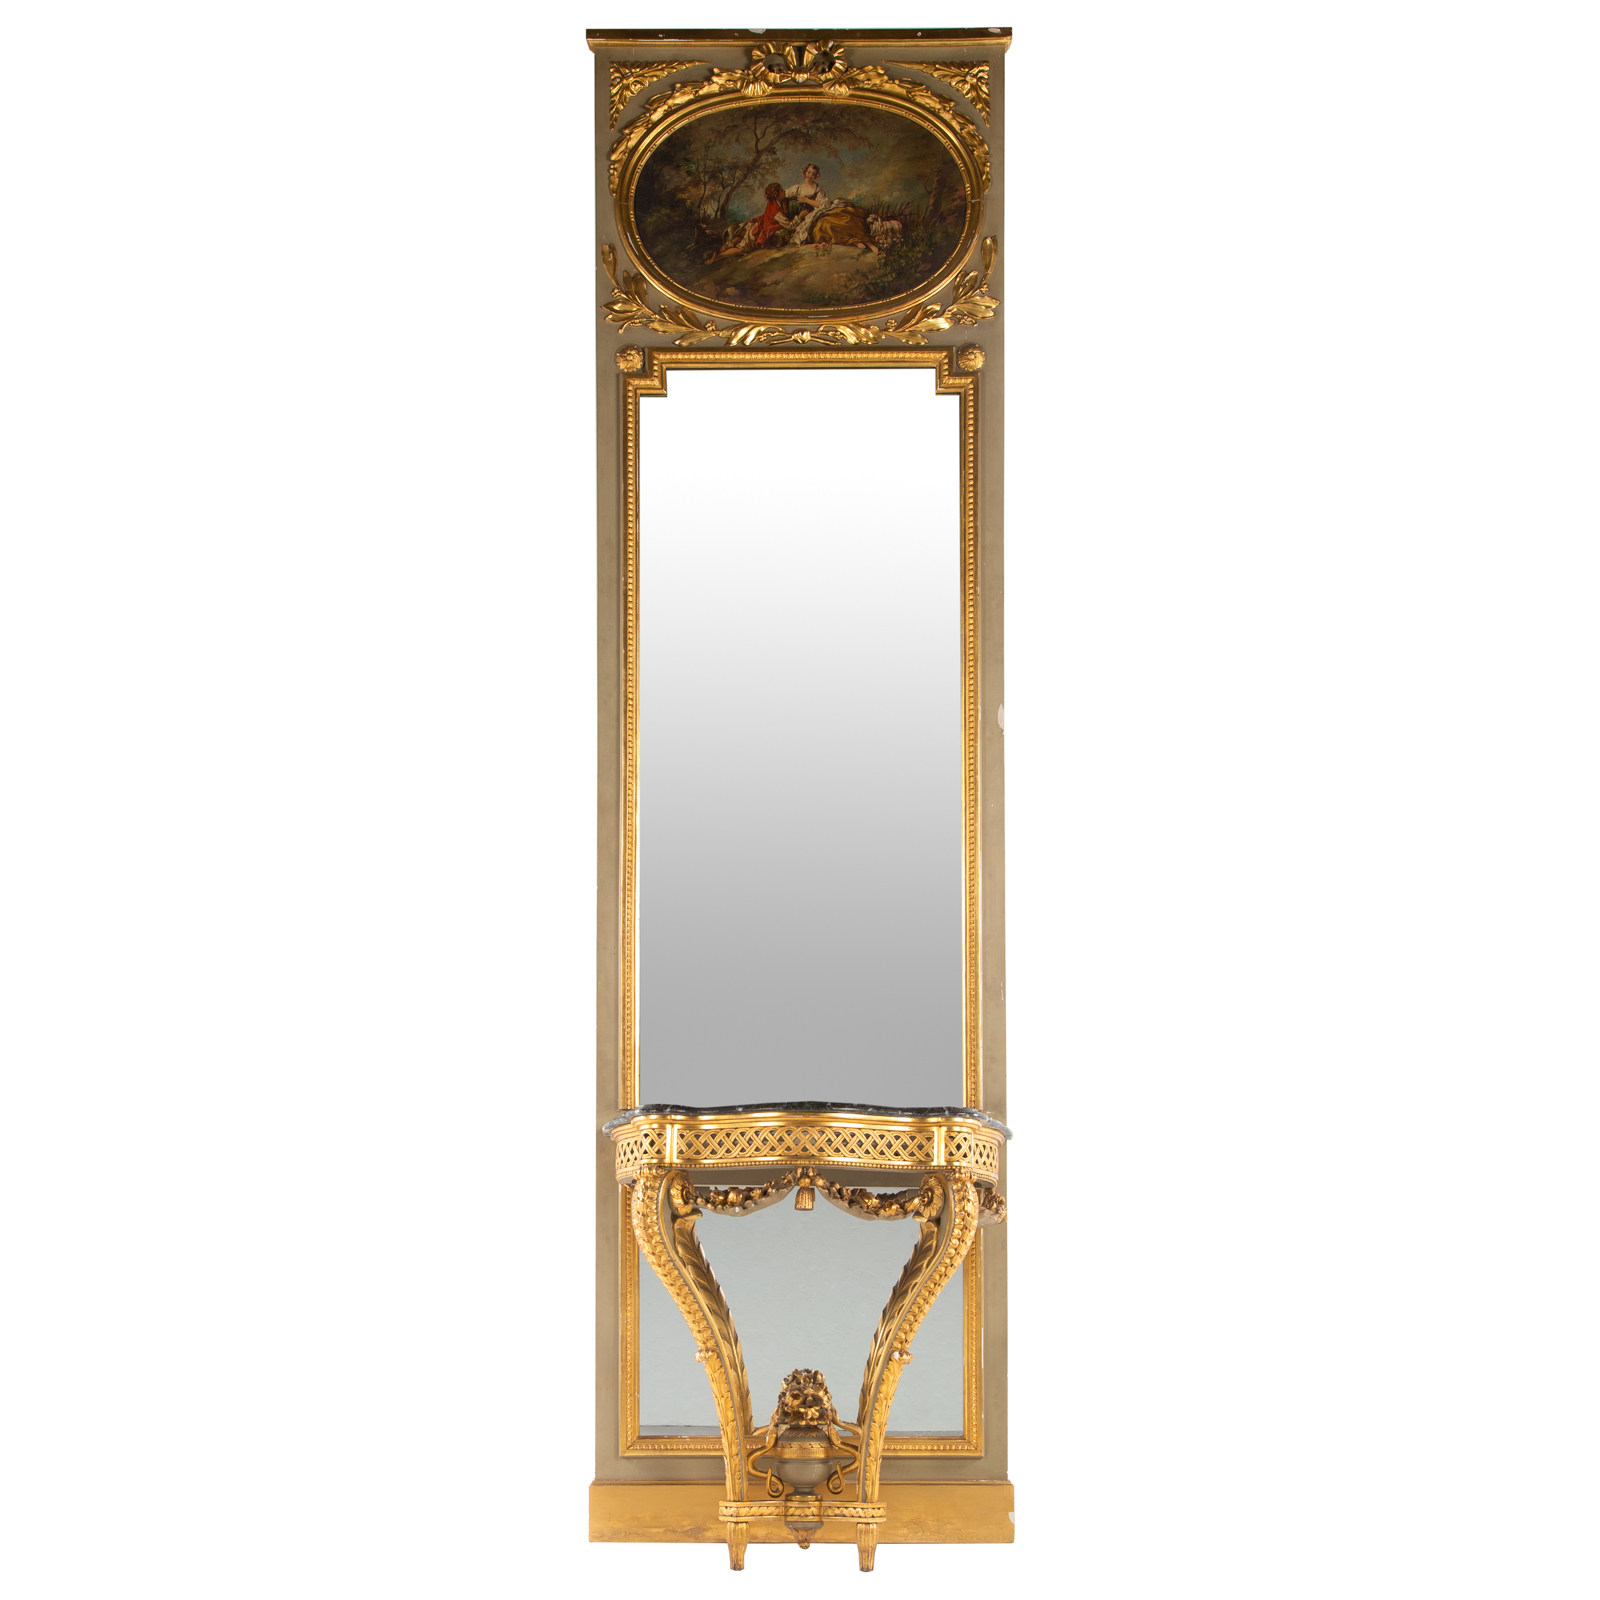 LARGE PIER MIRROR WITH BASE Late 3cb62f